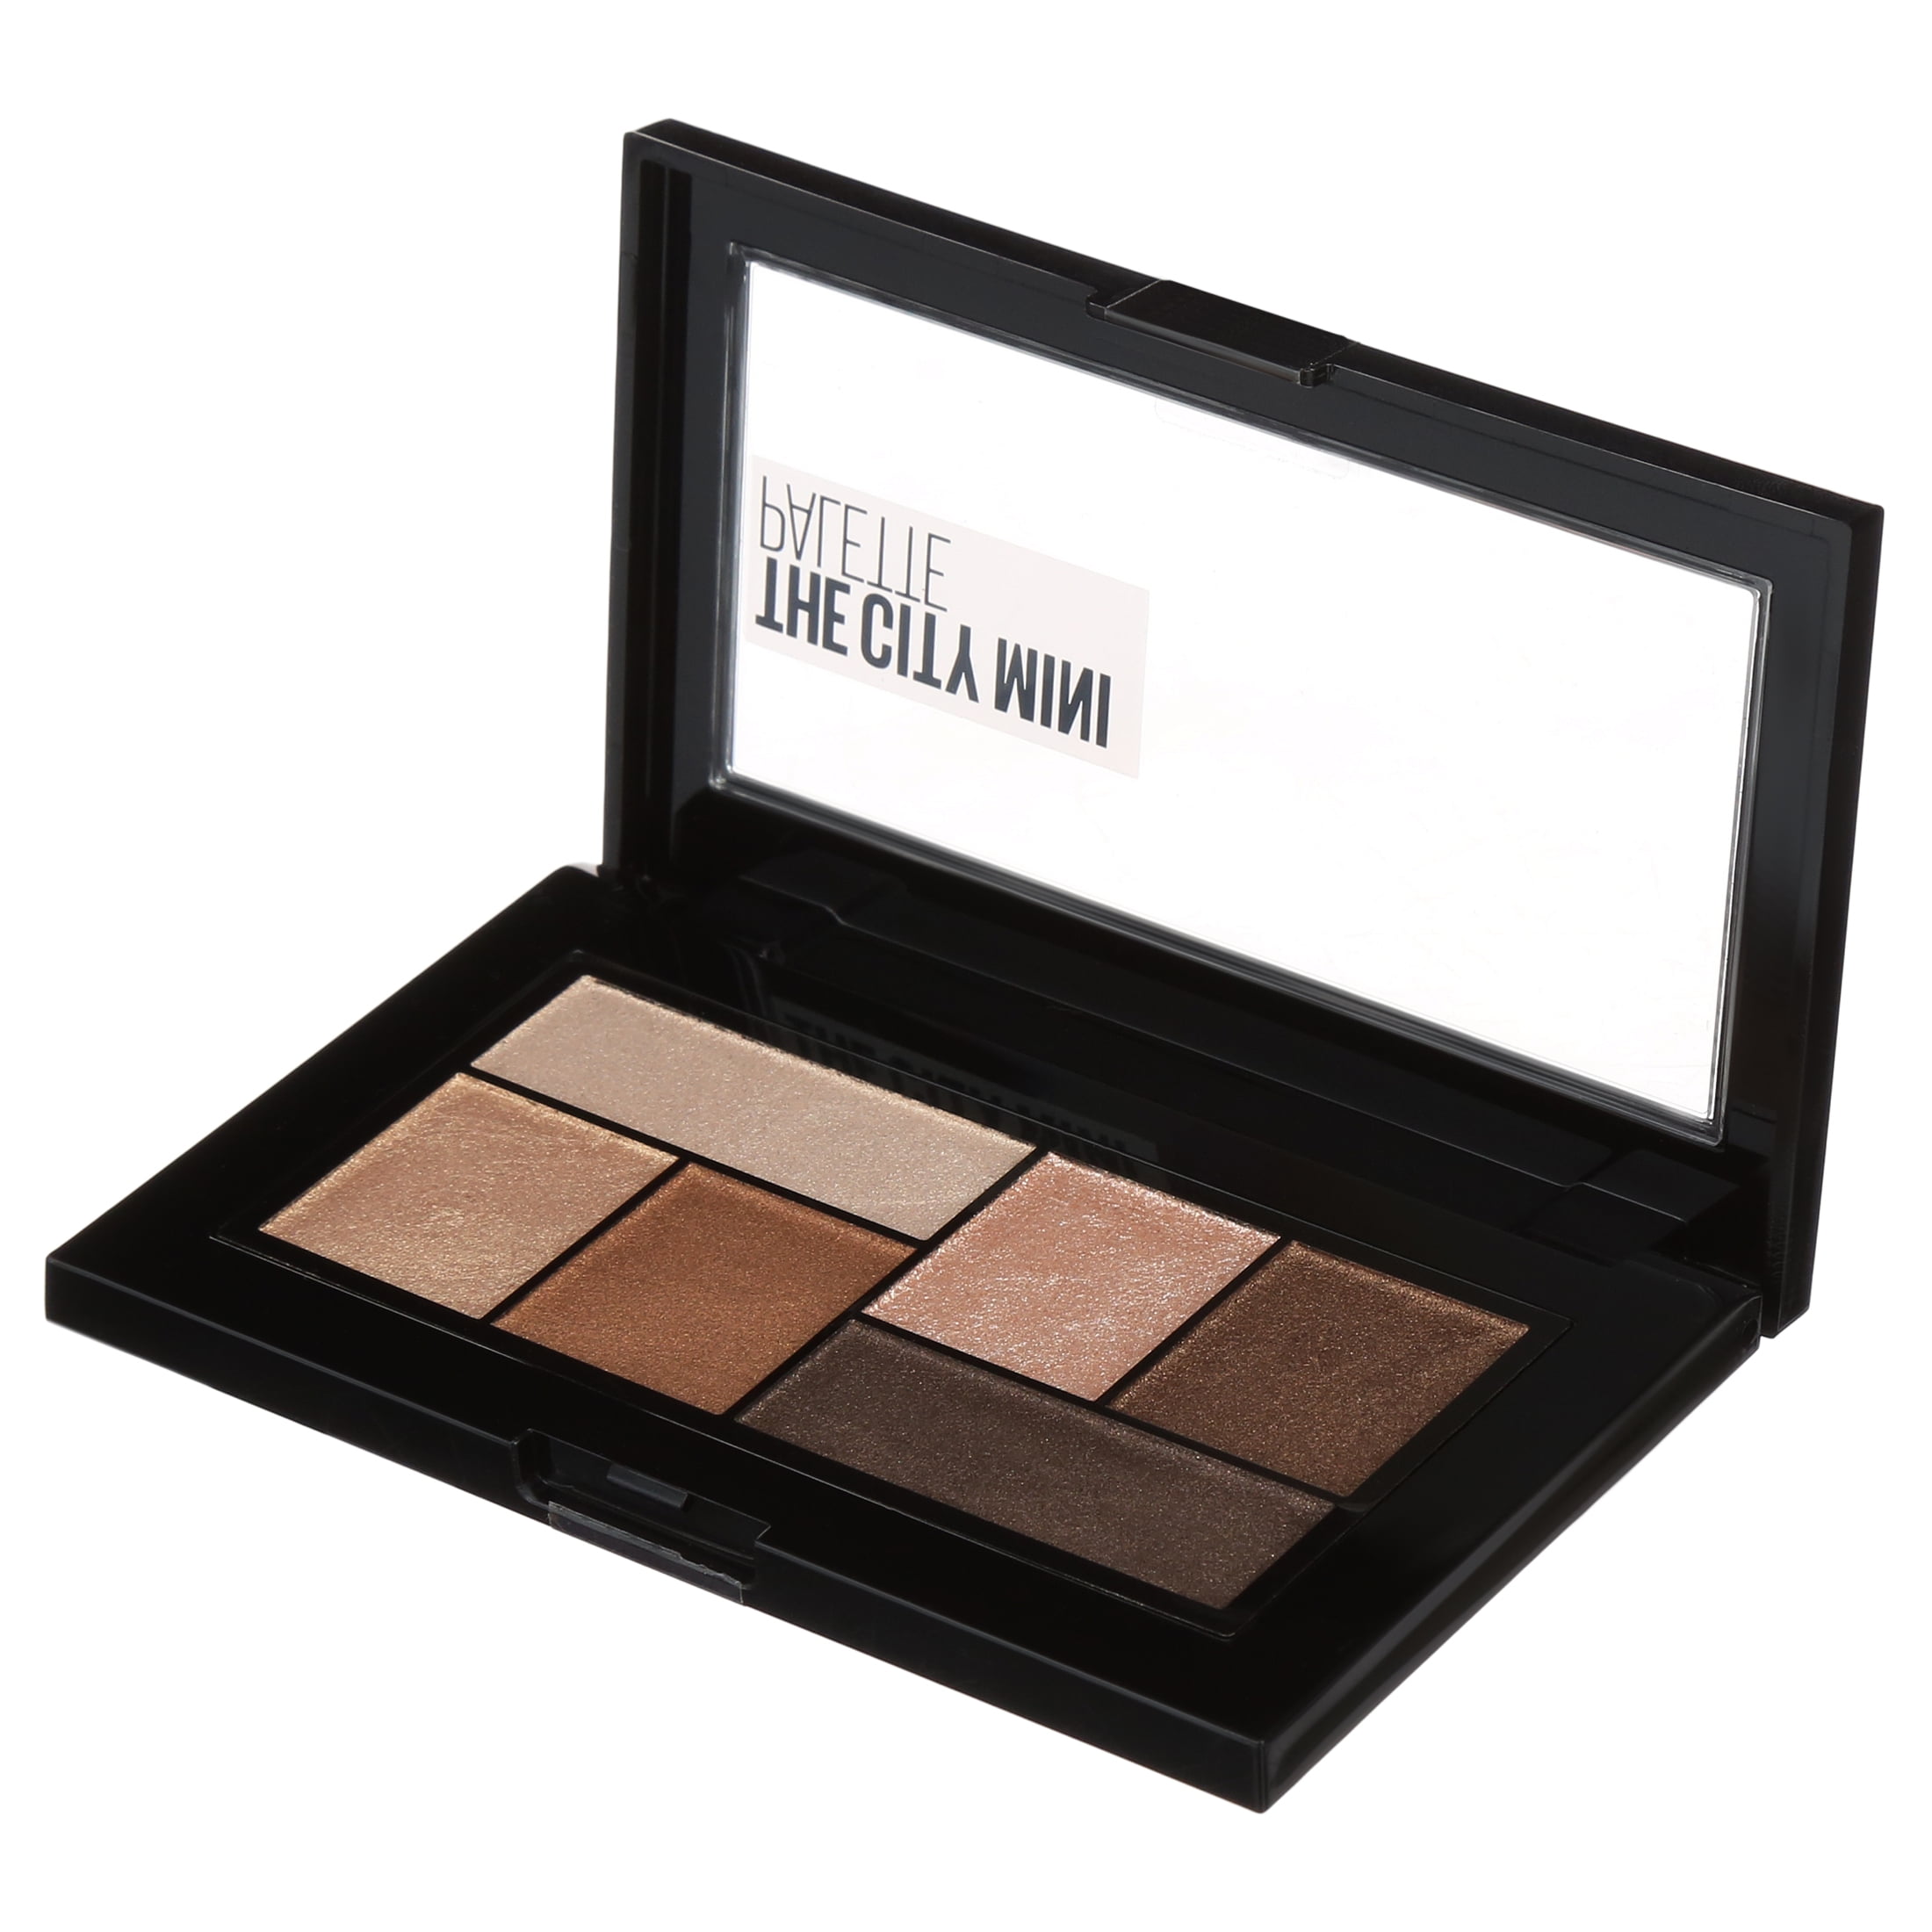 Bronzes Palette City Rooftop Mini The Makeup, Maybelline Eyeshadow